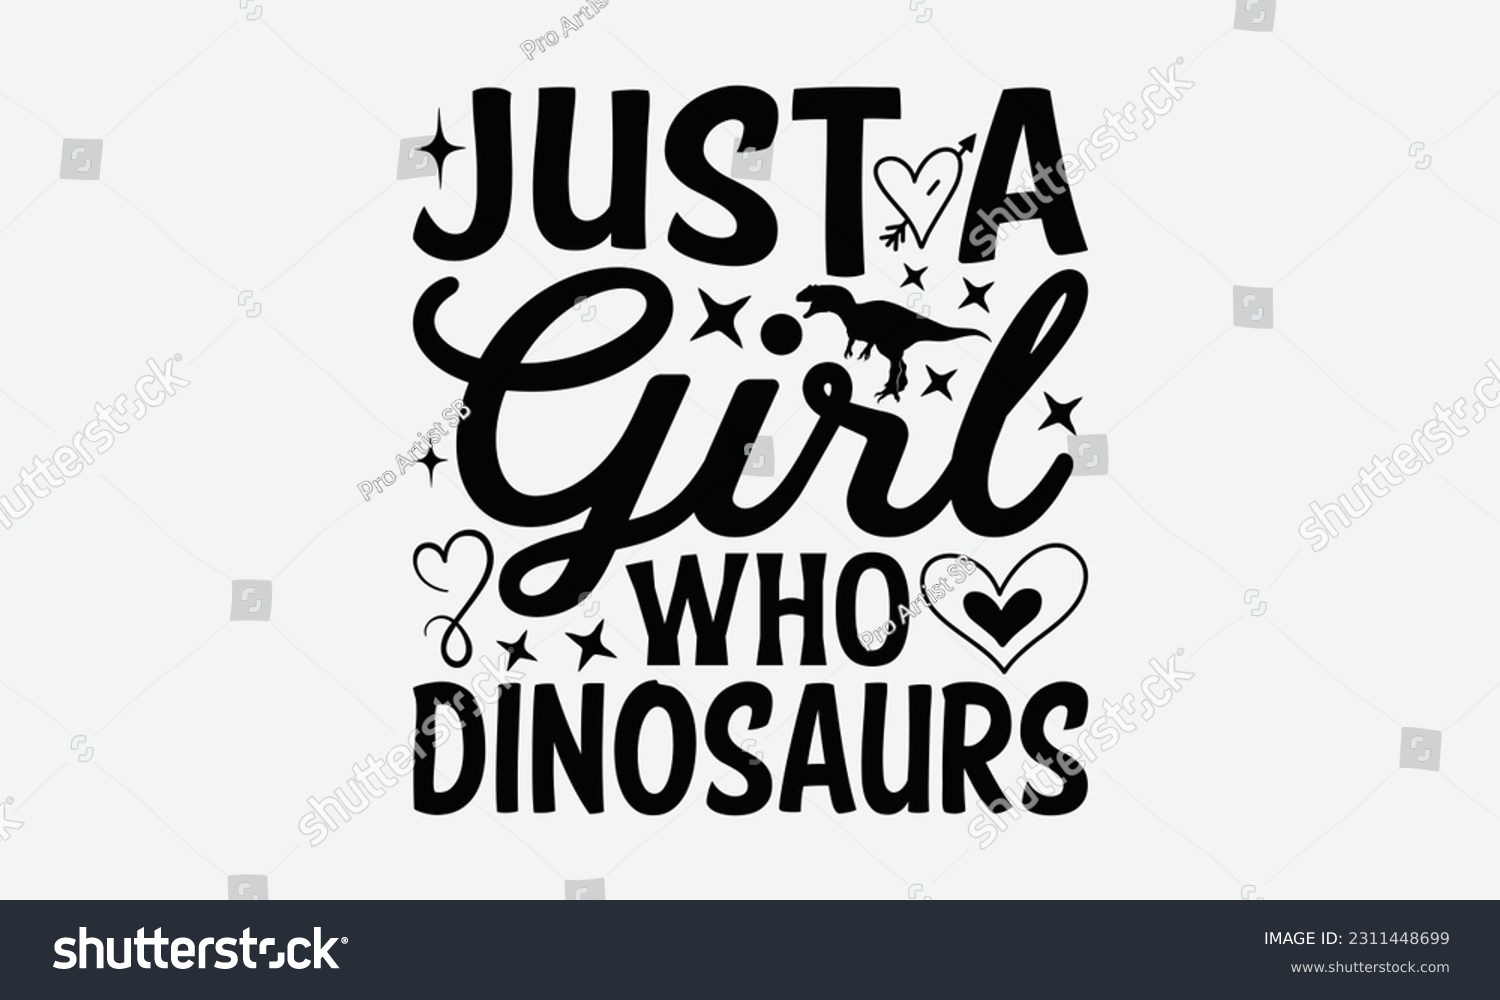 SVG of Just A Girl Who Dinosaurs - Dinosaur SVG Design, Motivational Inspirational T-shirt Quotes, Hand Drawn Vintage Illustration With Hand-Lettering And Decoration Elements. svg